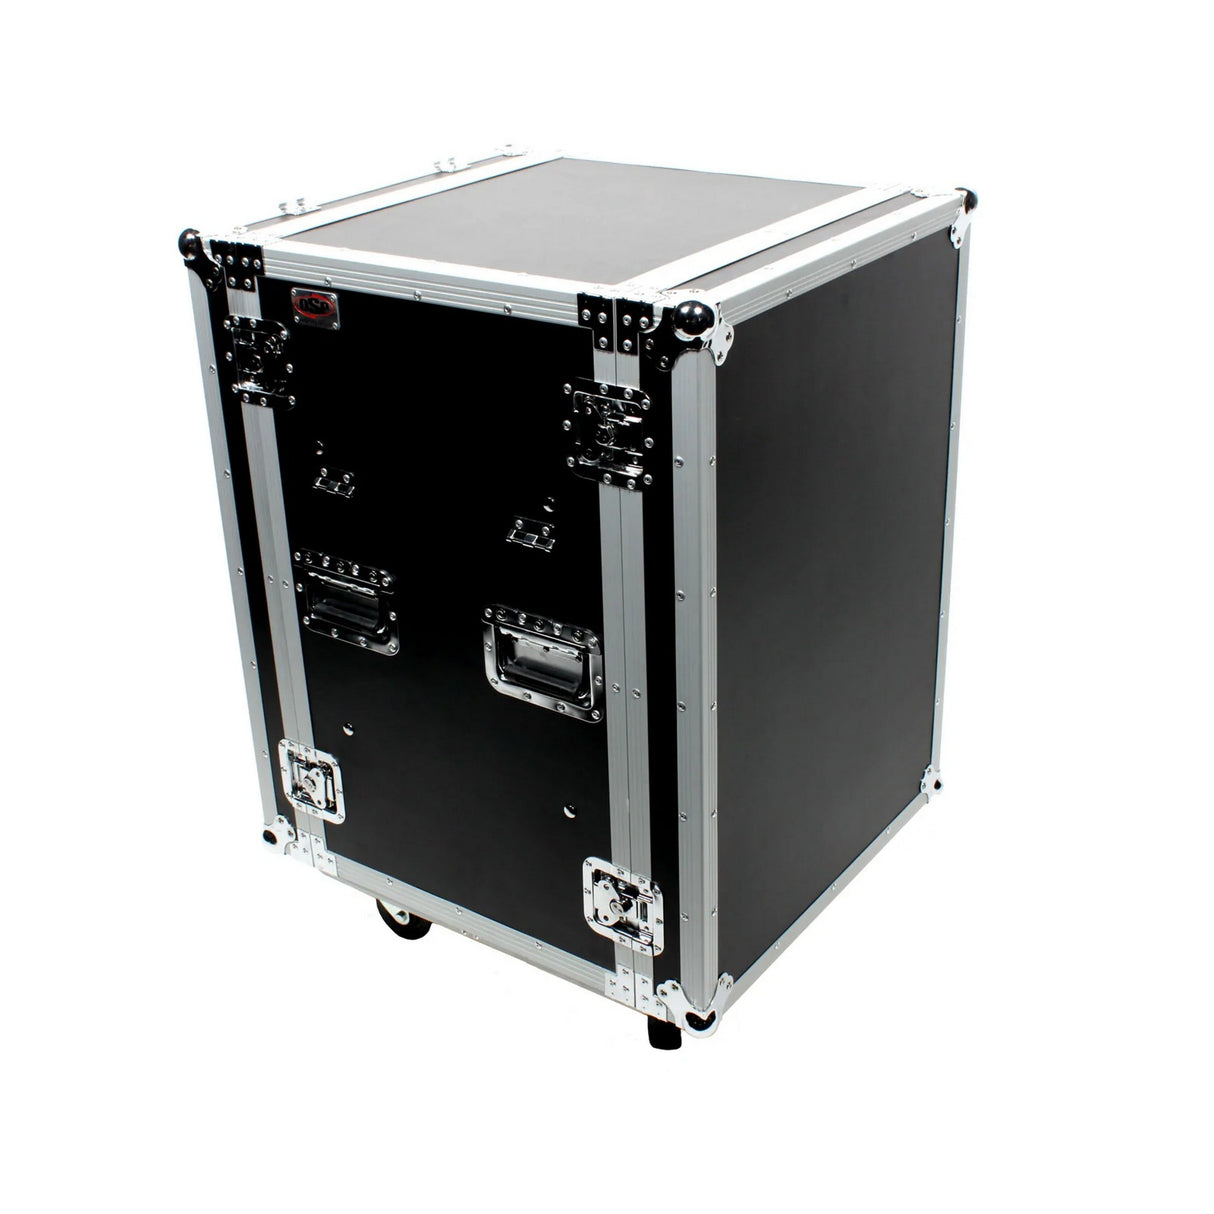 OSP SC16U-20SL 16 Space ATA Amp Rack with Casters and Attached Utility Table